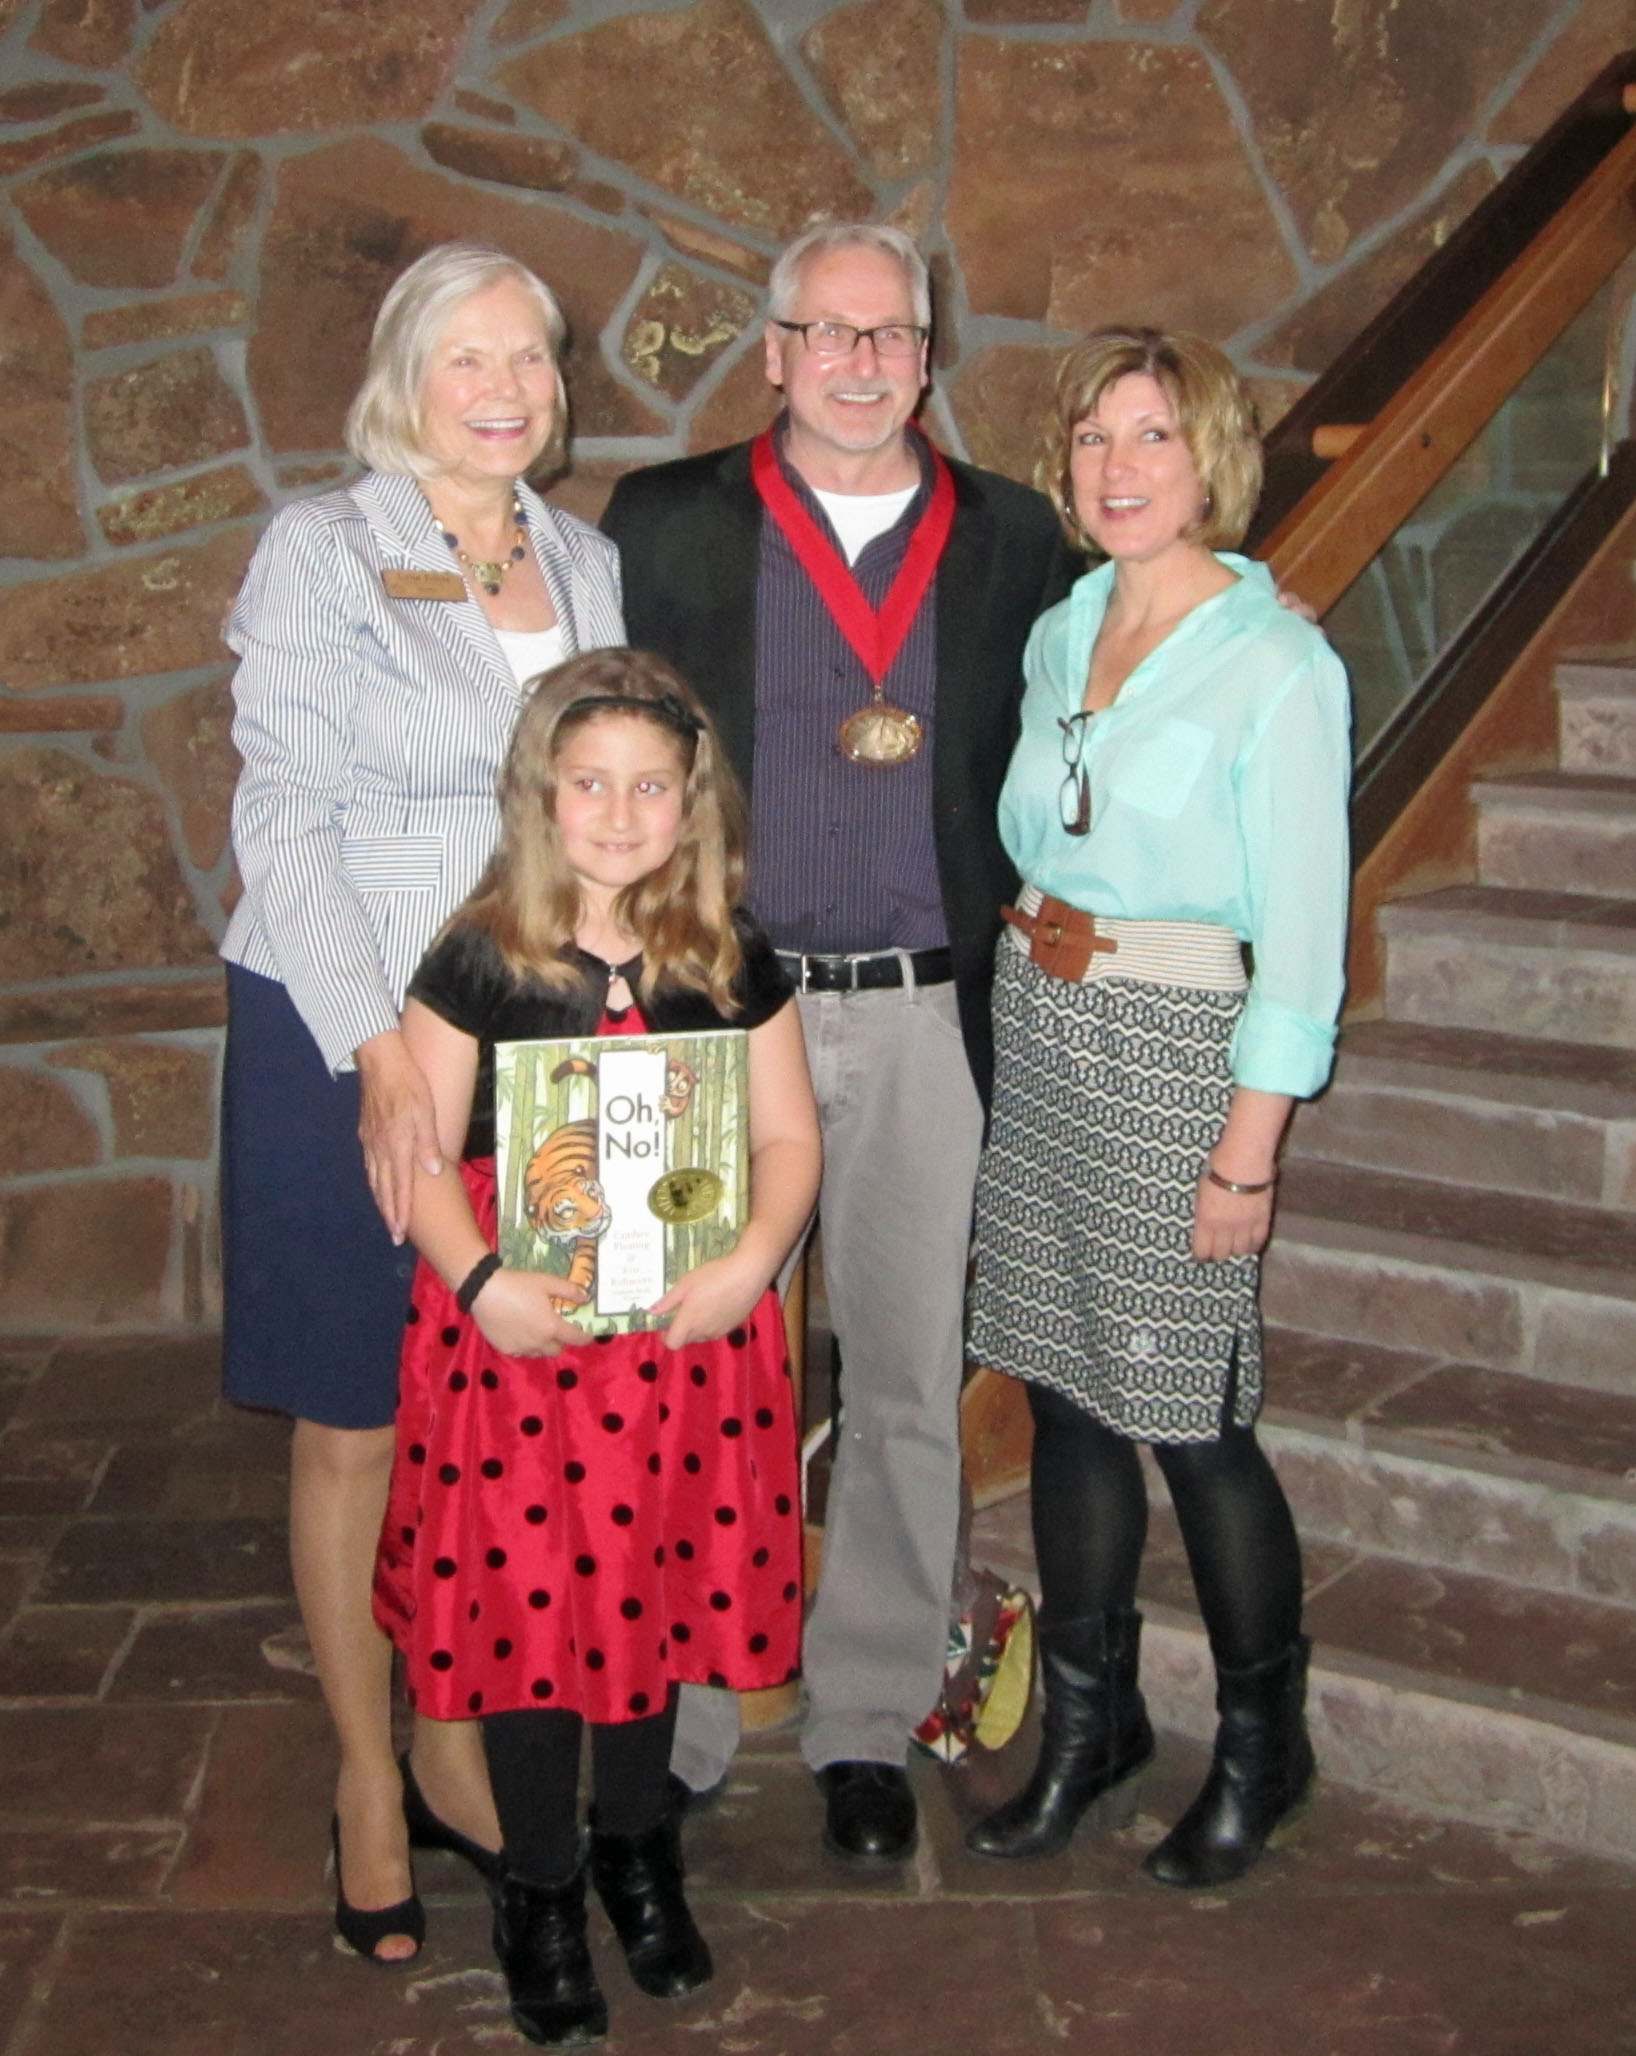 From left to right, author and National Museum of Wildlife Art Board of Trustees member, Lynn Friess with 2013 Bull-Bransom award winner, Eric Rohmann and author of the winning book, Candace Fleming.